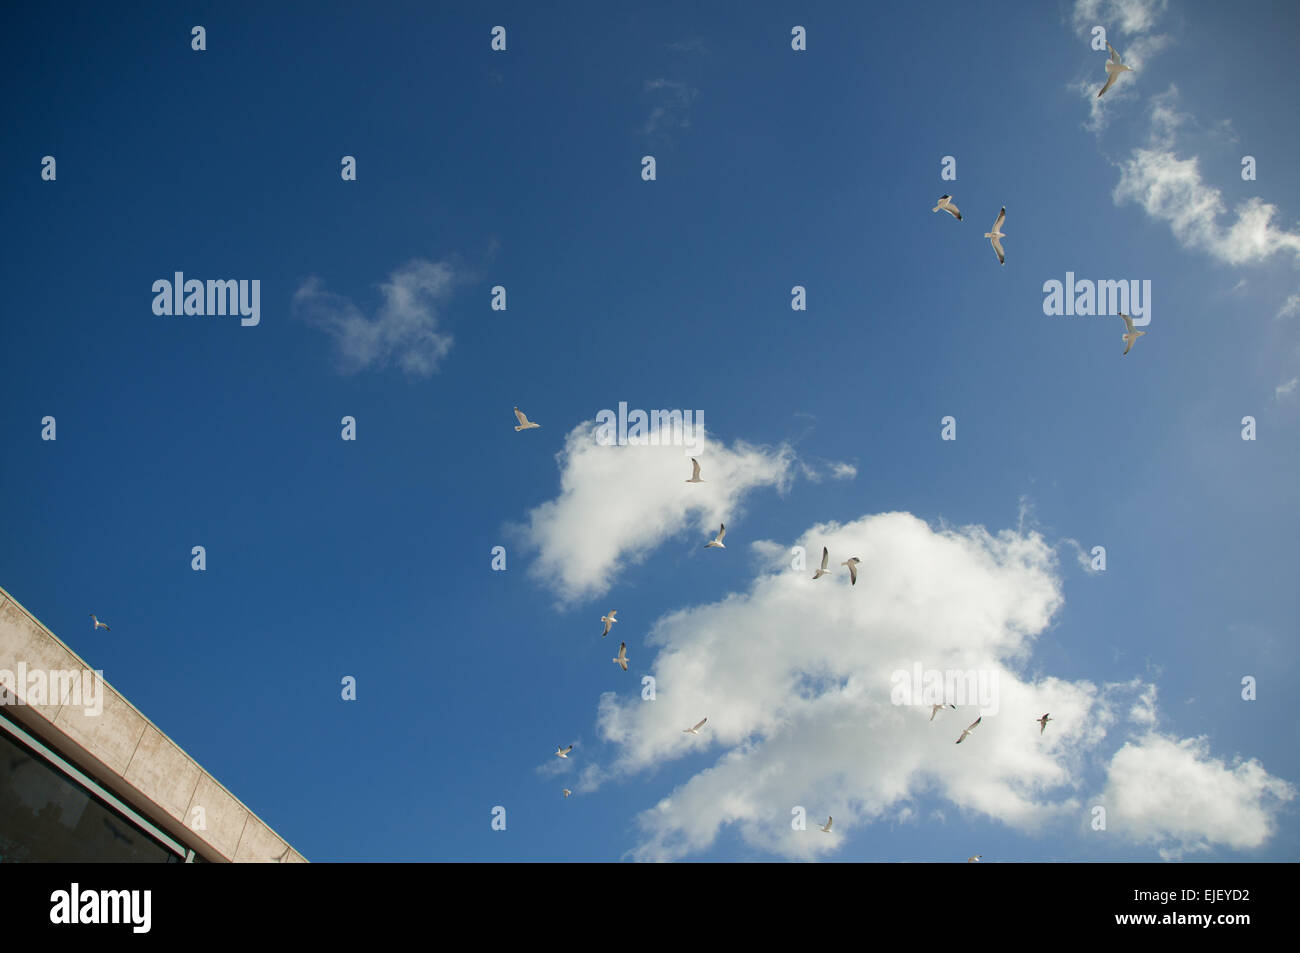 The sky of Bristol full of gulls, pigeons and clouds. Stock Photo